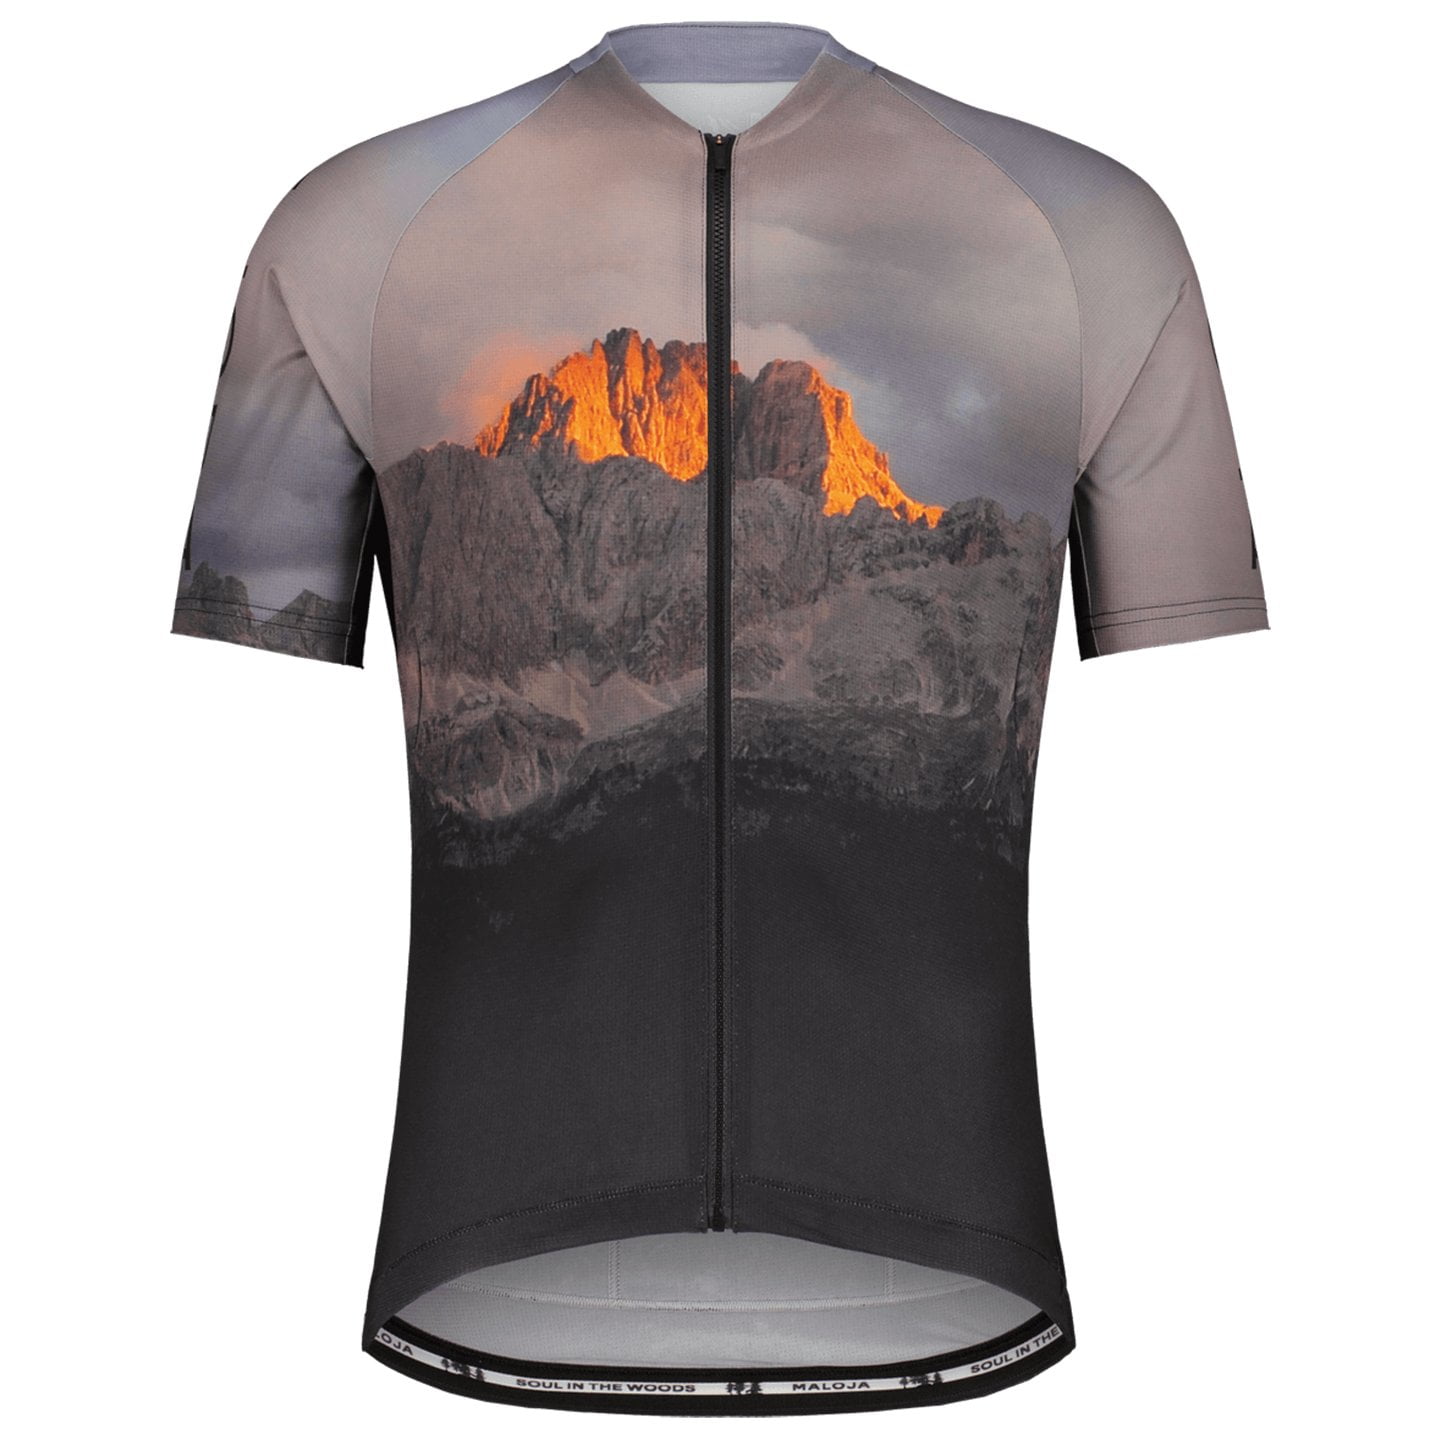 MALOJA AlbaM. Short Sleeve Jersey Short Sleeve Jersey, for men, size S, Cycling jersey, Cycling clothing